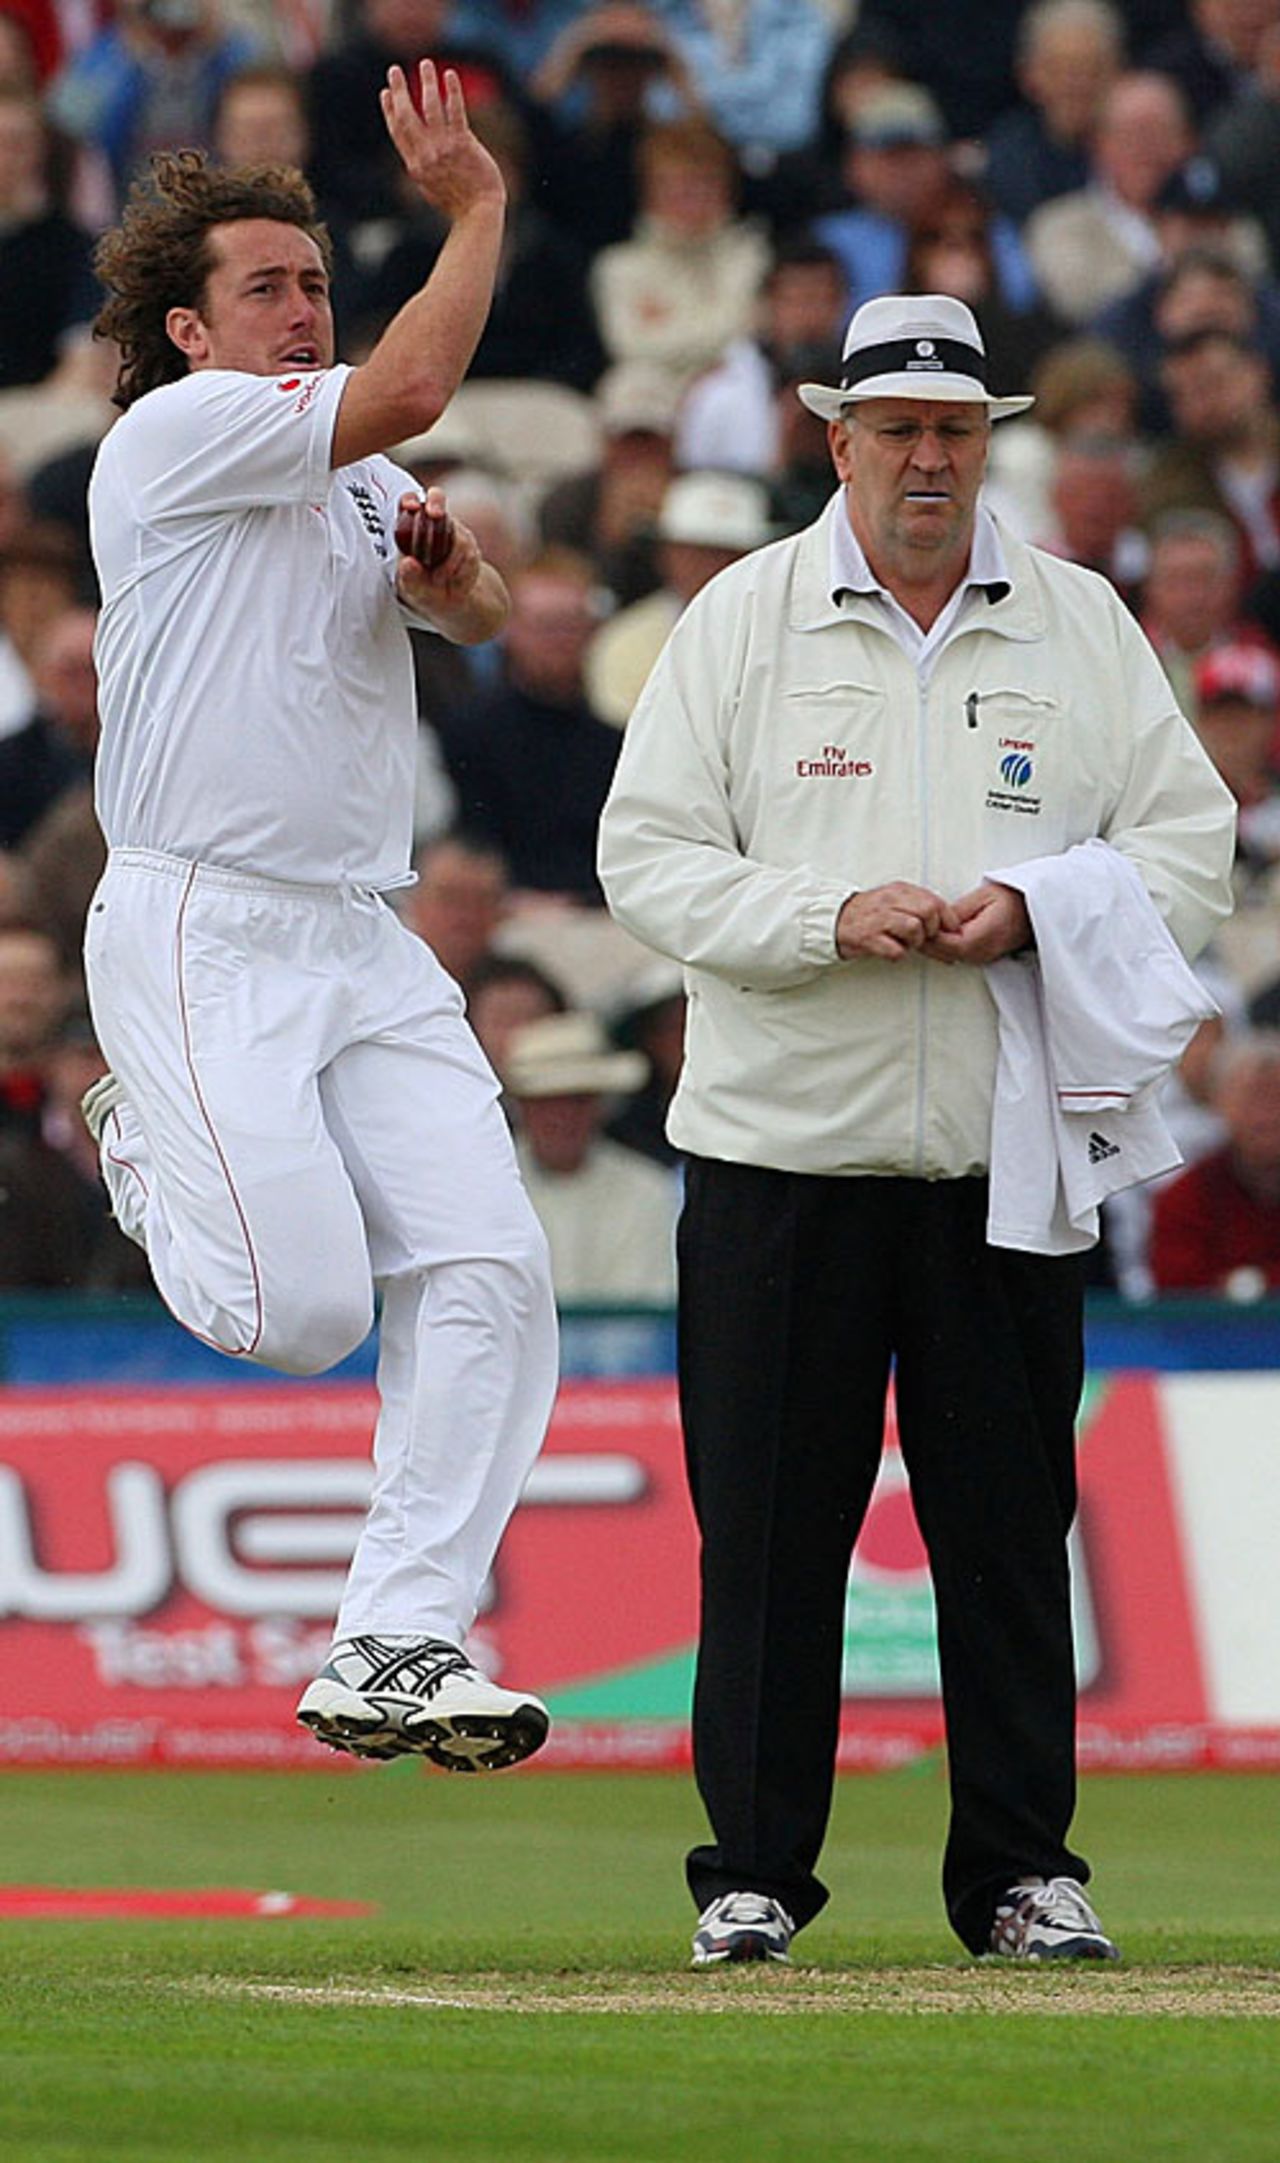 Ryan Sidebottom flies into bowl past Darrell Hair, England v New Zealand, 2nd Test, Old Trafford, May 23, 2008